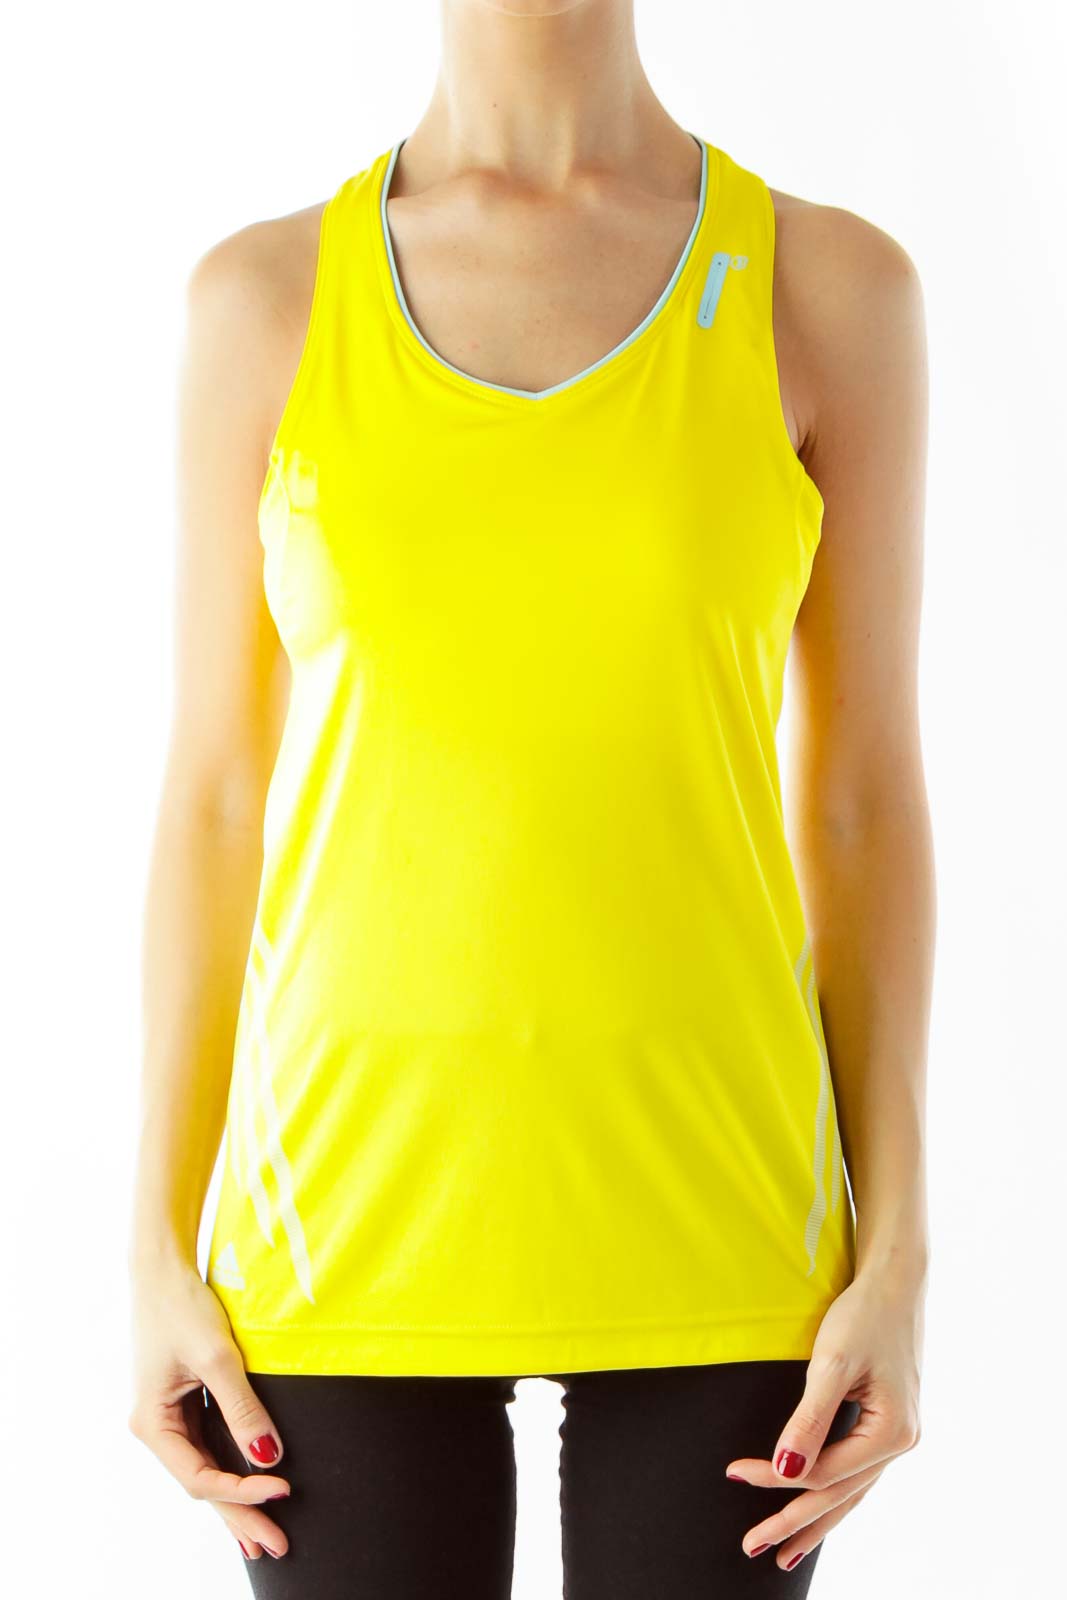 Yellow Sports Top Front